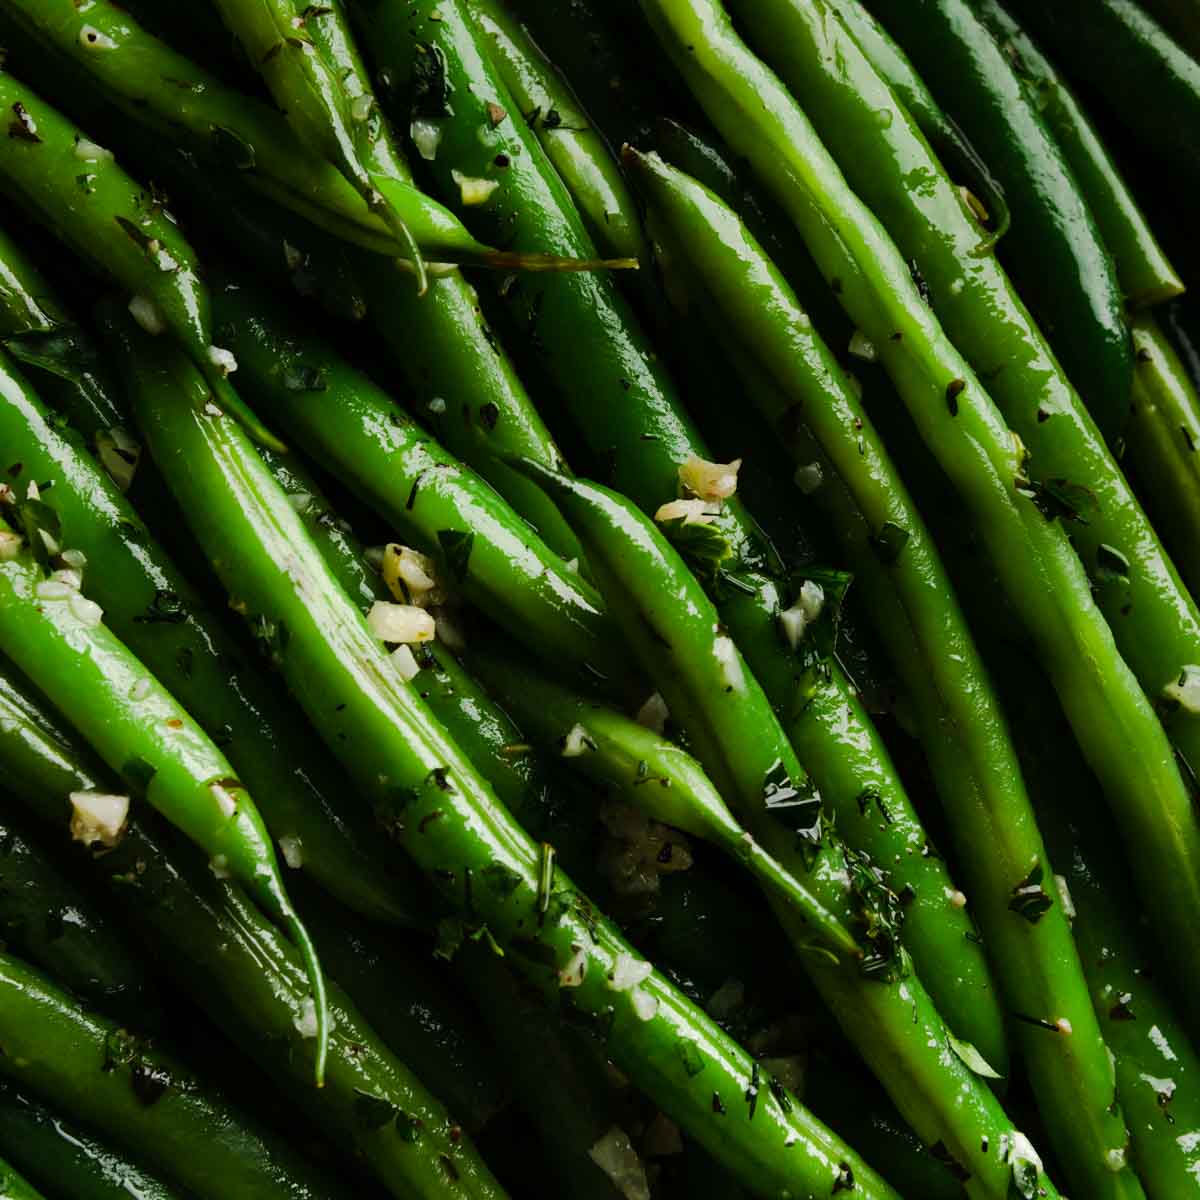 A close up image of haricot verts in garlic herb butter